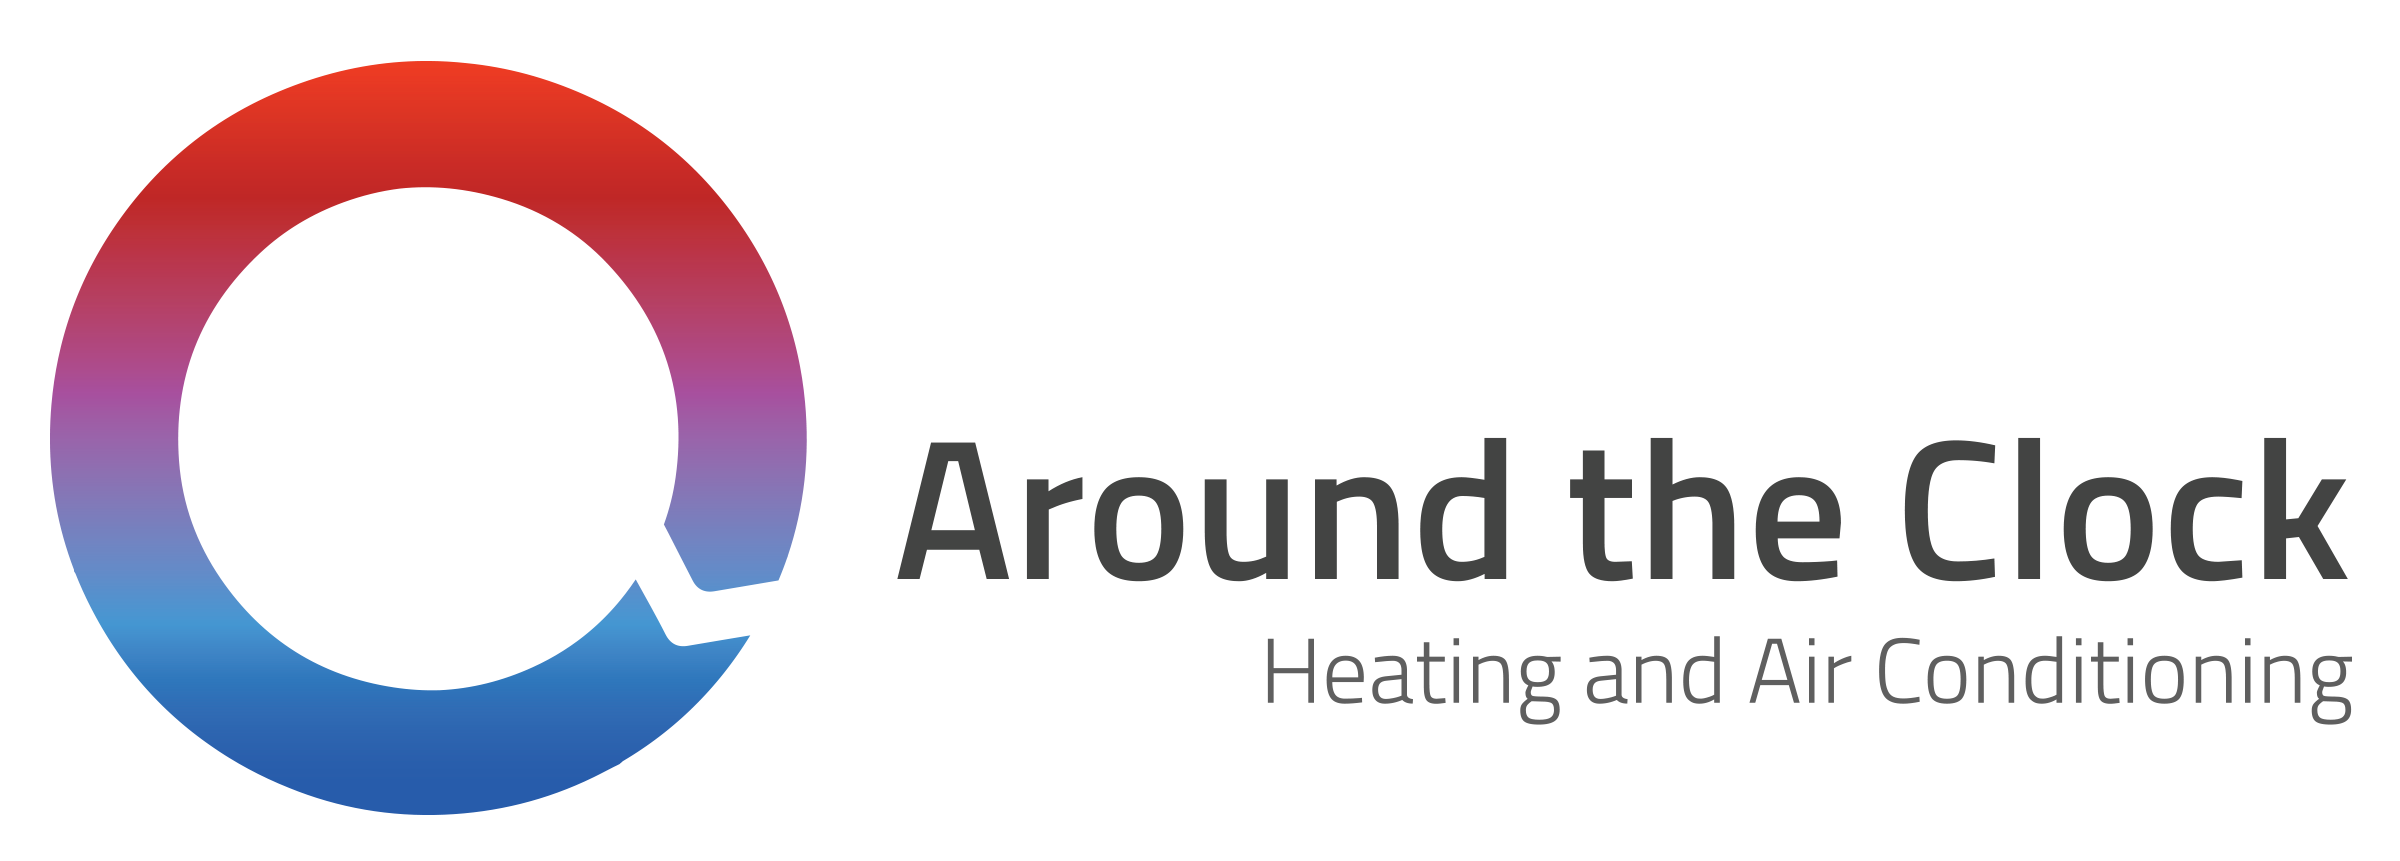 Around the Clock Heating and Air Conditioning, Inc Logo